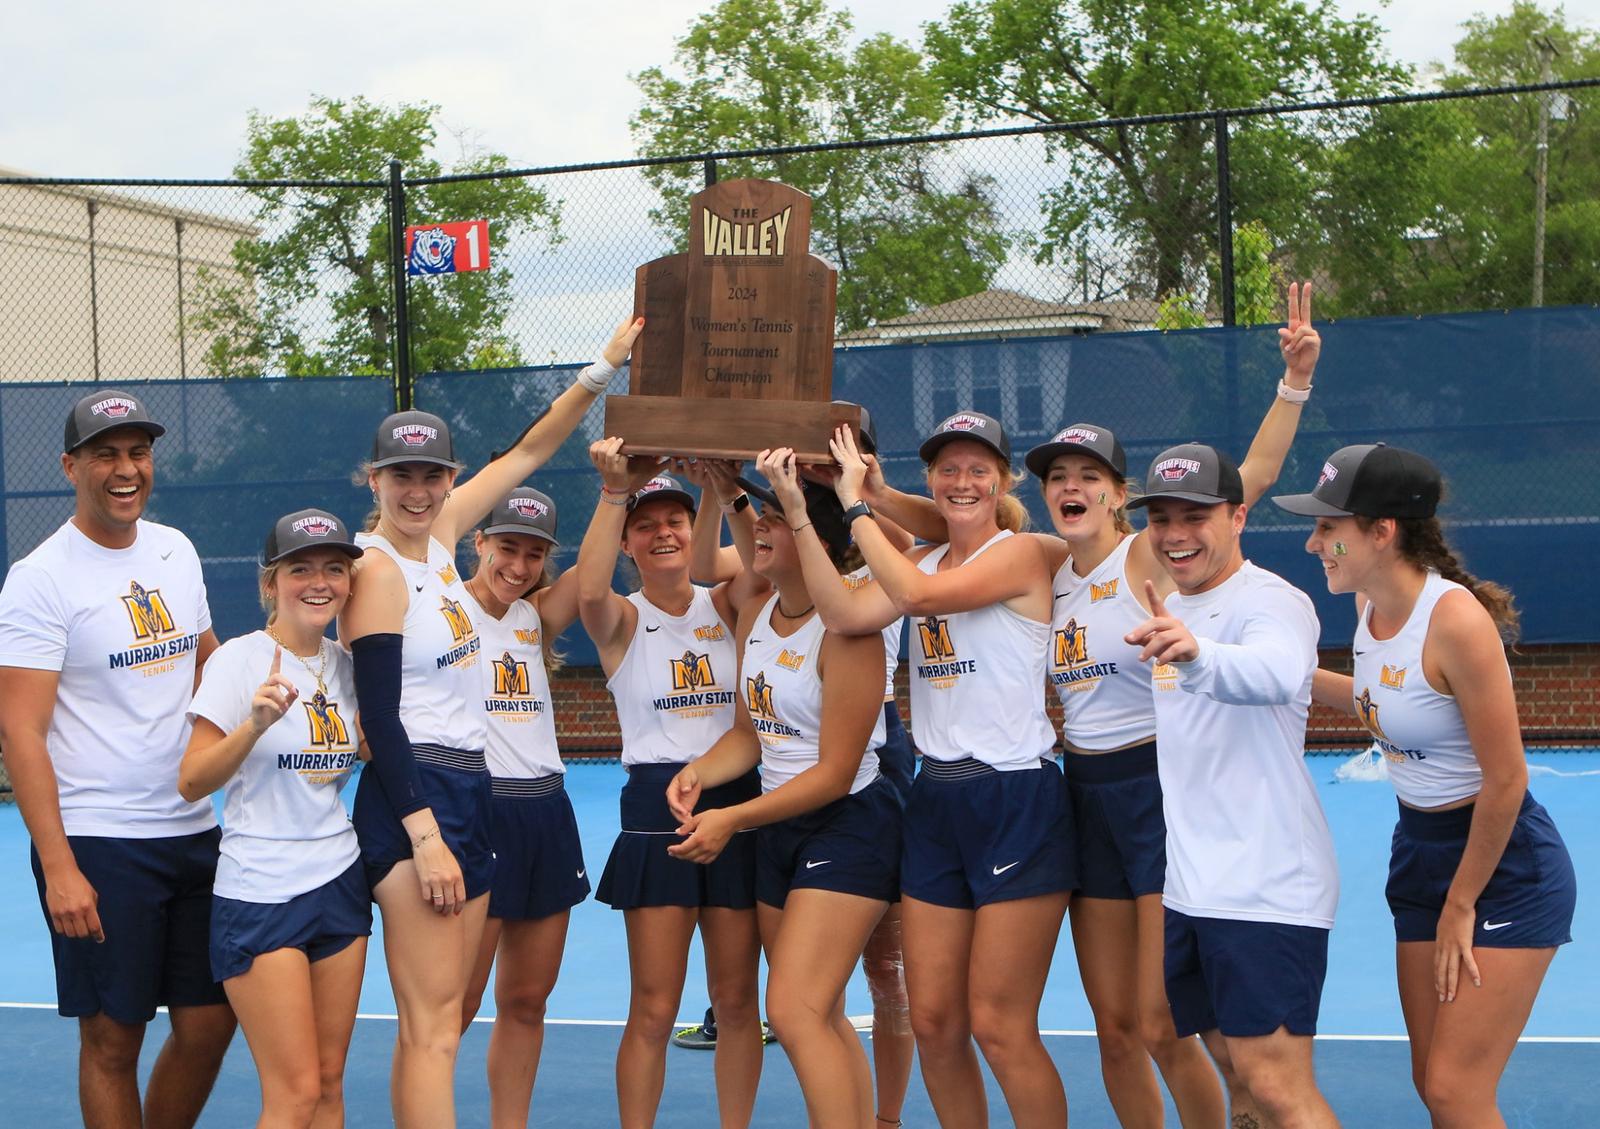 Murray State Women’s Tennis Claim MVC Tournament Title and Undefeated Spring Season With 10-0 Record